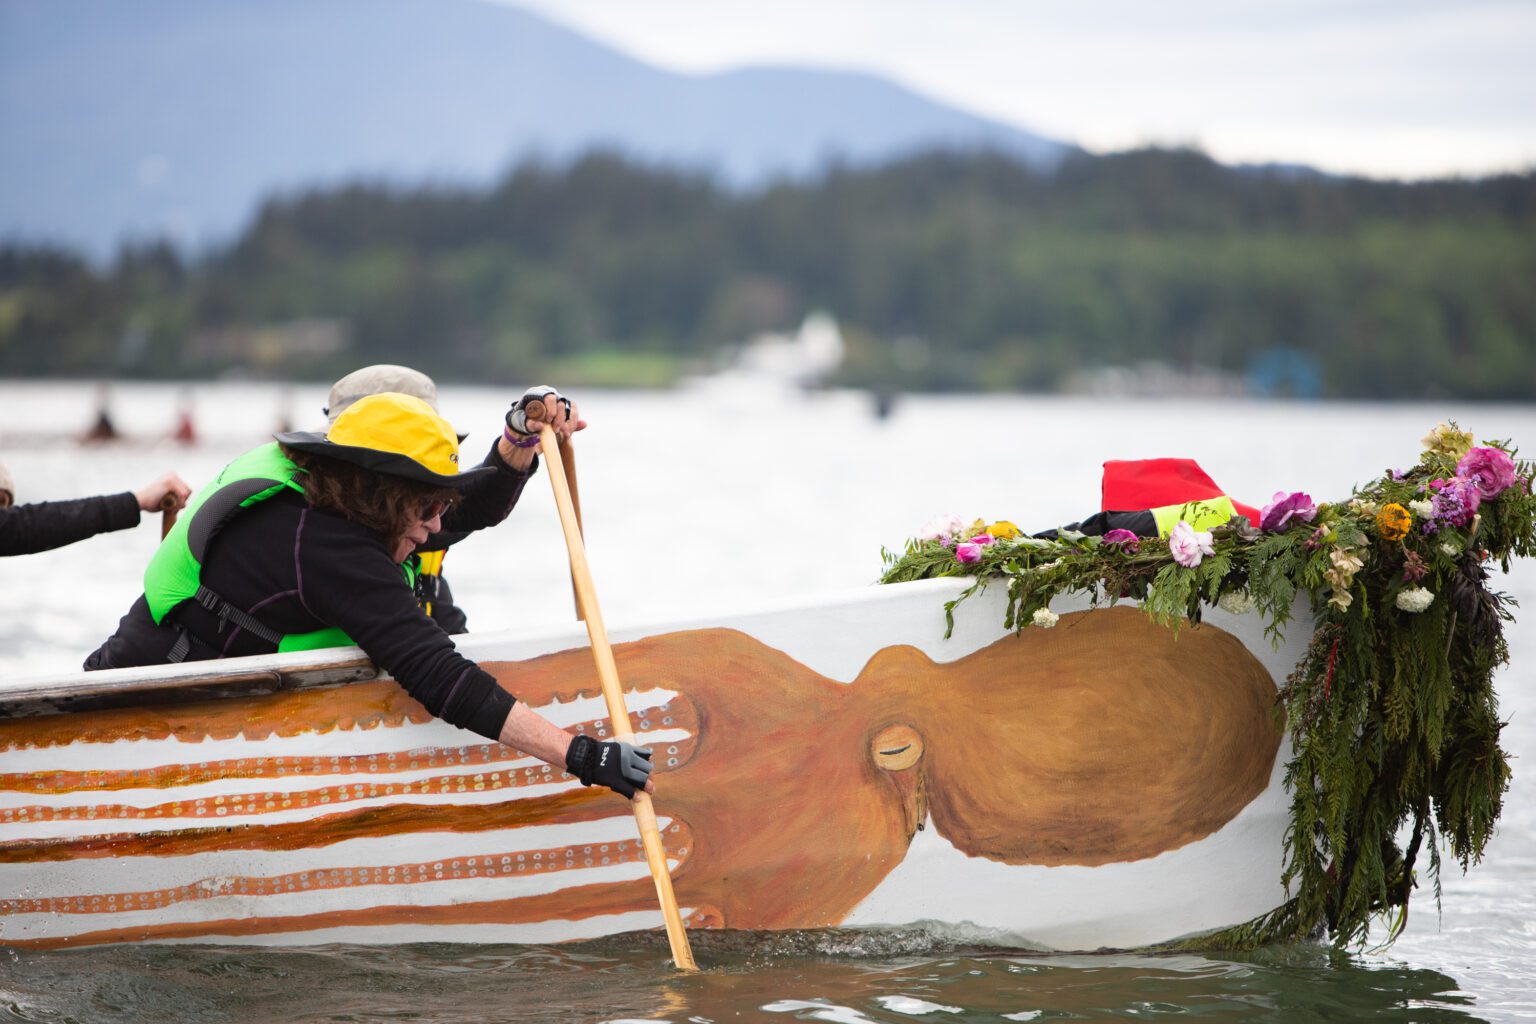 The Octopus Canoe Family arrives at Lummi Nation Stommish Grounds for the Gathering of the Eagles on May 27. The canoe and three others began in Anacortes on May 22 and traveled along the ancenstral highway of the Lhaq'temish (Lummi) people.